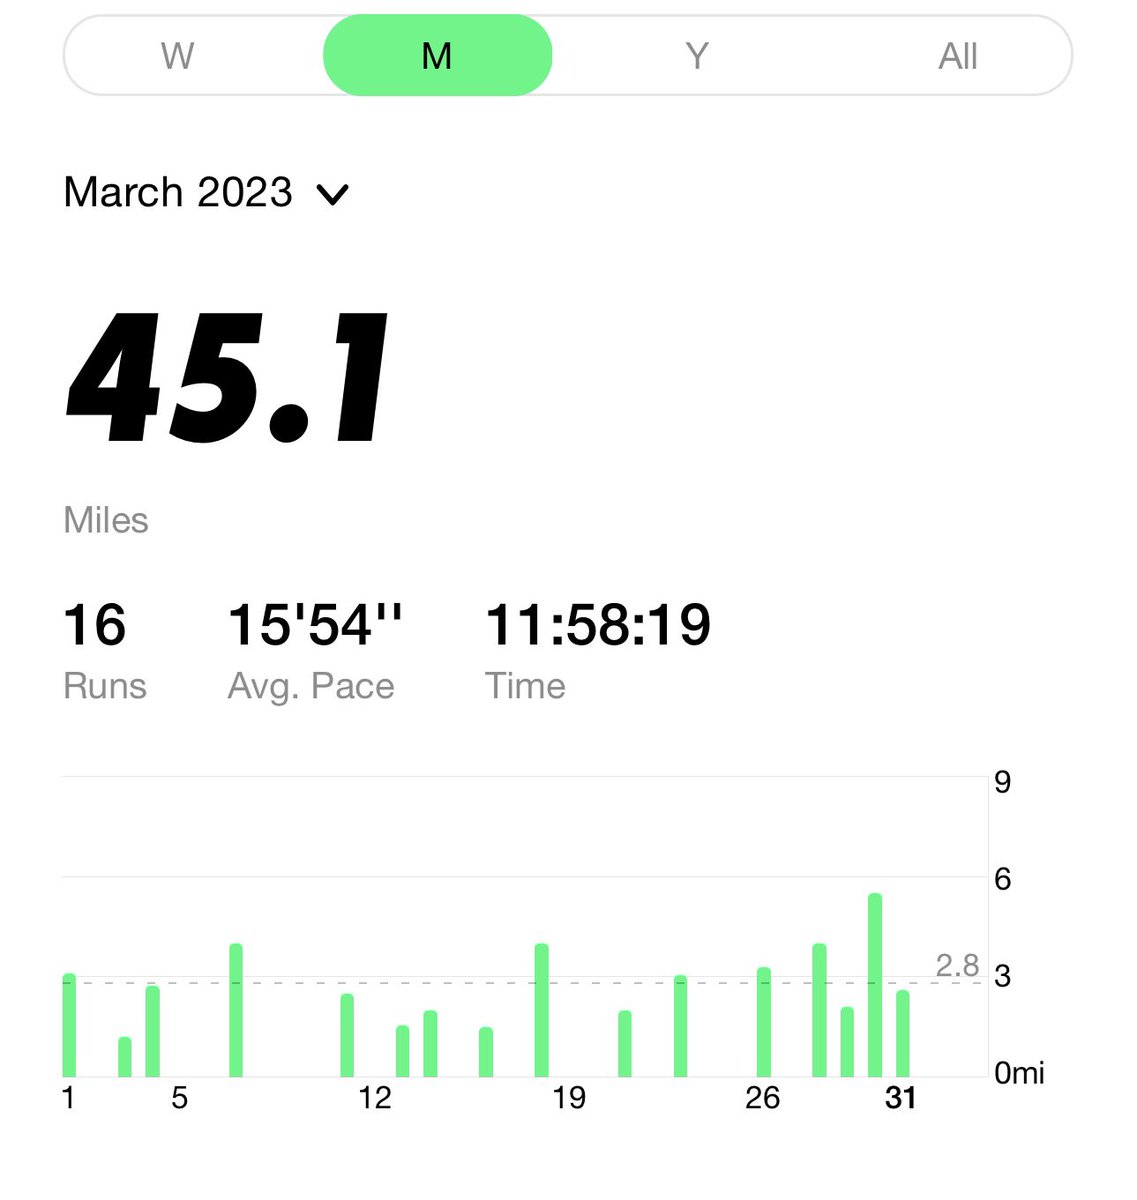 Done- 45 miles run in the month of March for @AmCollegeGastro #RideOrStrideFor45 challenge to raise awareness for #ColorectalCancer new screening age🏃‍♂️Props to the phenomenal campaign by @ACG_EBGI past 2 weeks. Join our Twitter space tonight for #EBGIvsCRC mythbusting!